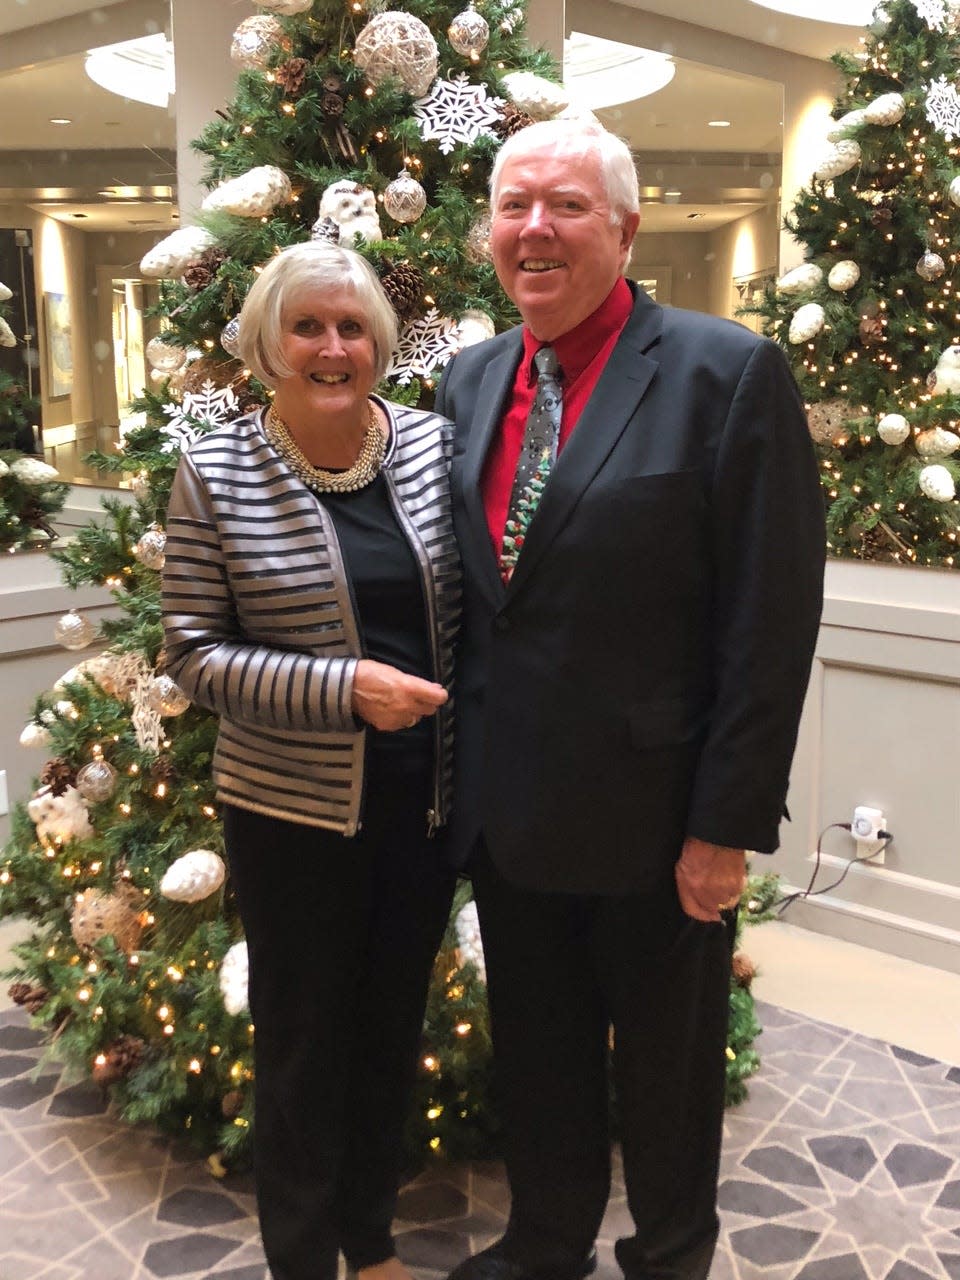 Bob Slack and his wife, Lois, spent last winter at their home in Canada for the first time in two decades. The "snowbirds" normally leave the cold of Canada for their home at a manufactured-home community in Winter Haven, but COVID restrictions prevented them from driving down last year.